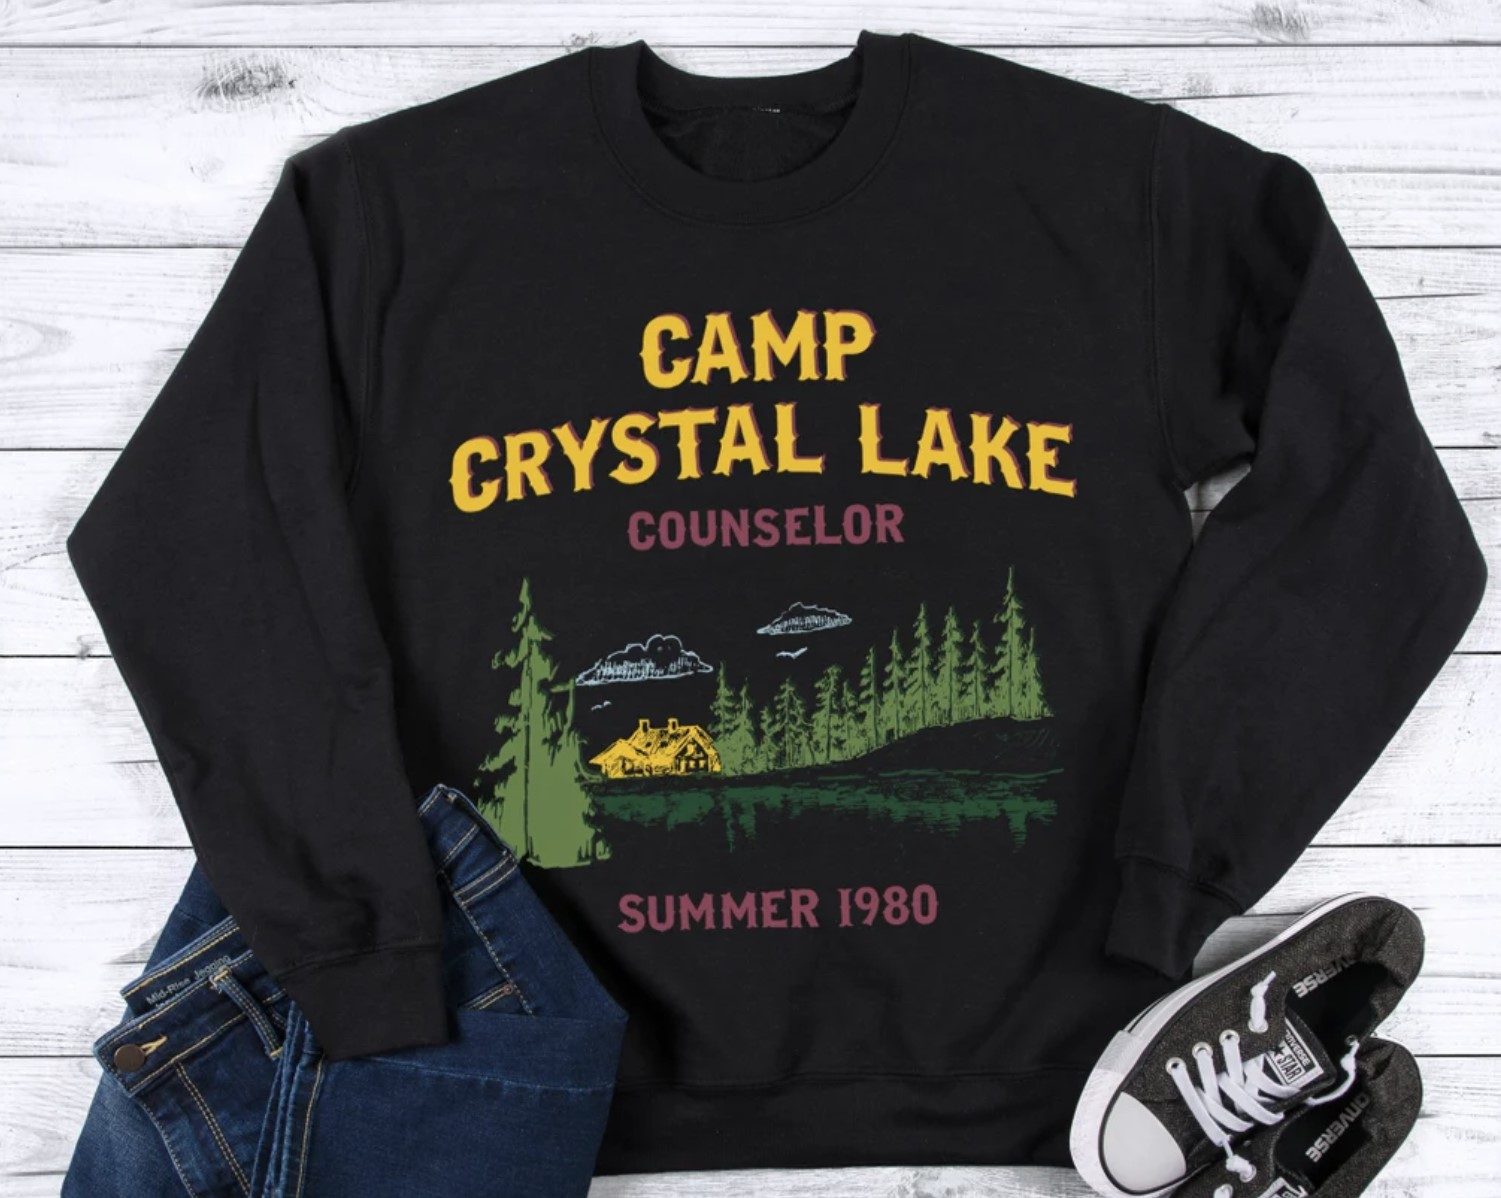 Jason Voorhees Friday The 13th Camp Crystal Lake Counselor 80s Horror Movie Tee Shirt Shirts Owl 